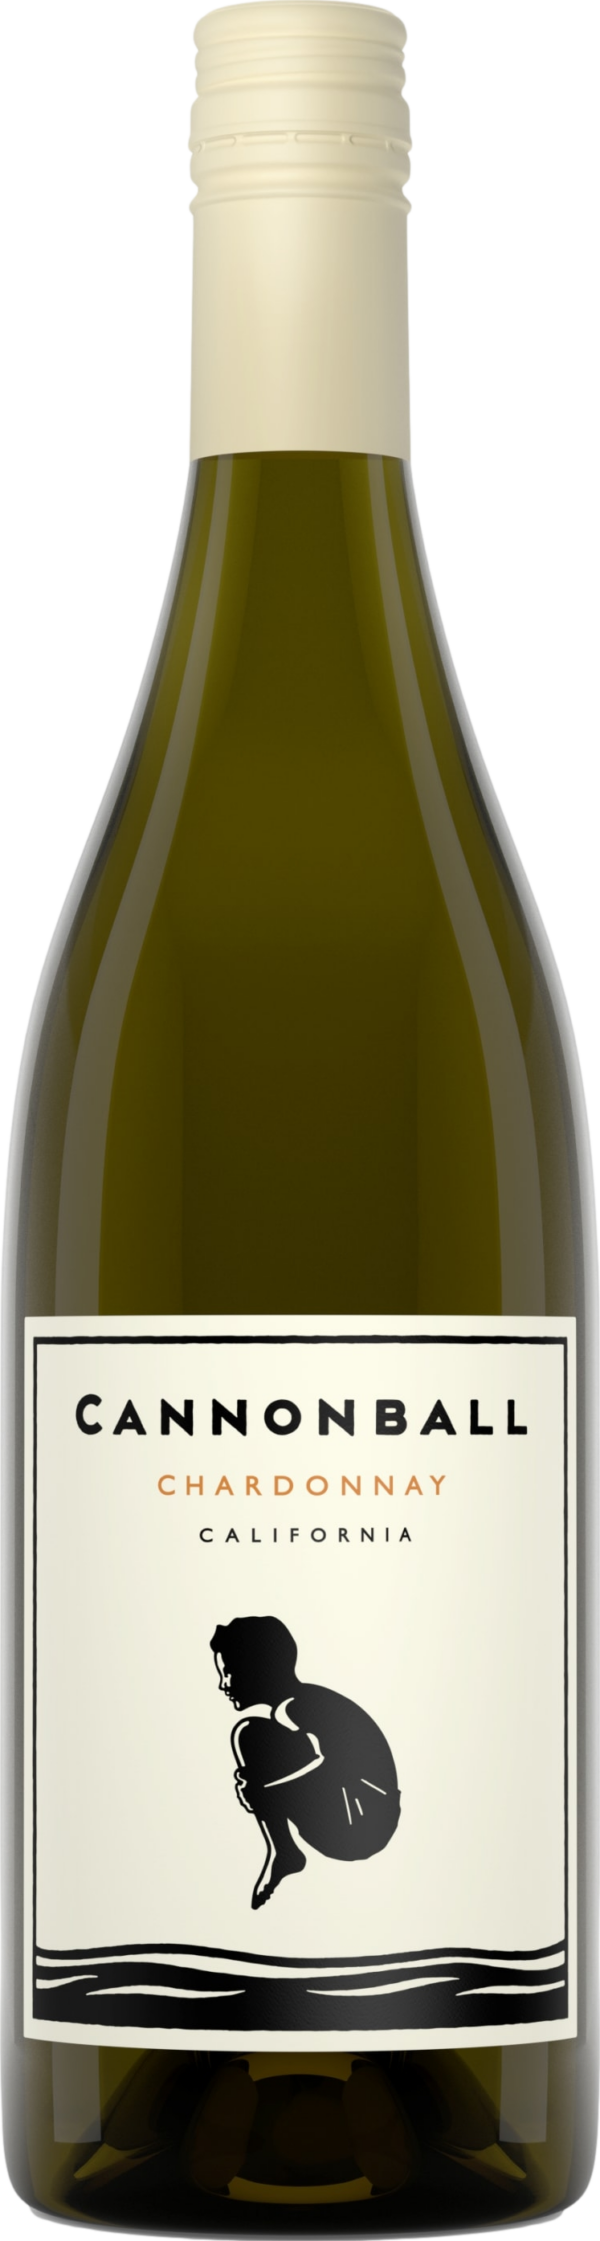 Product image of Cannonball Chardonnay 2020 from 8wines